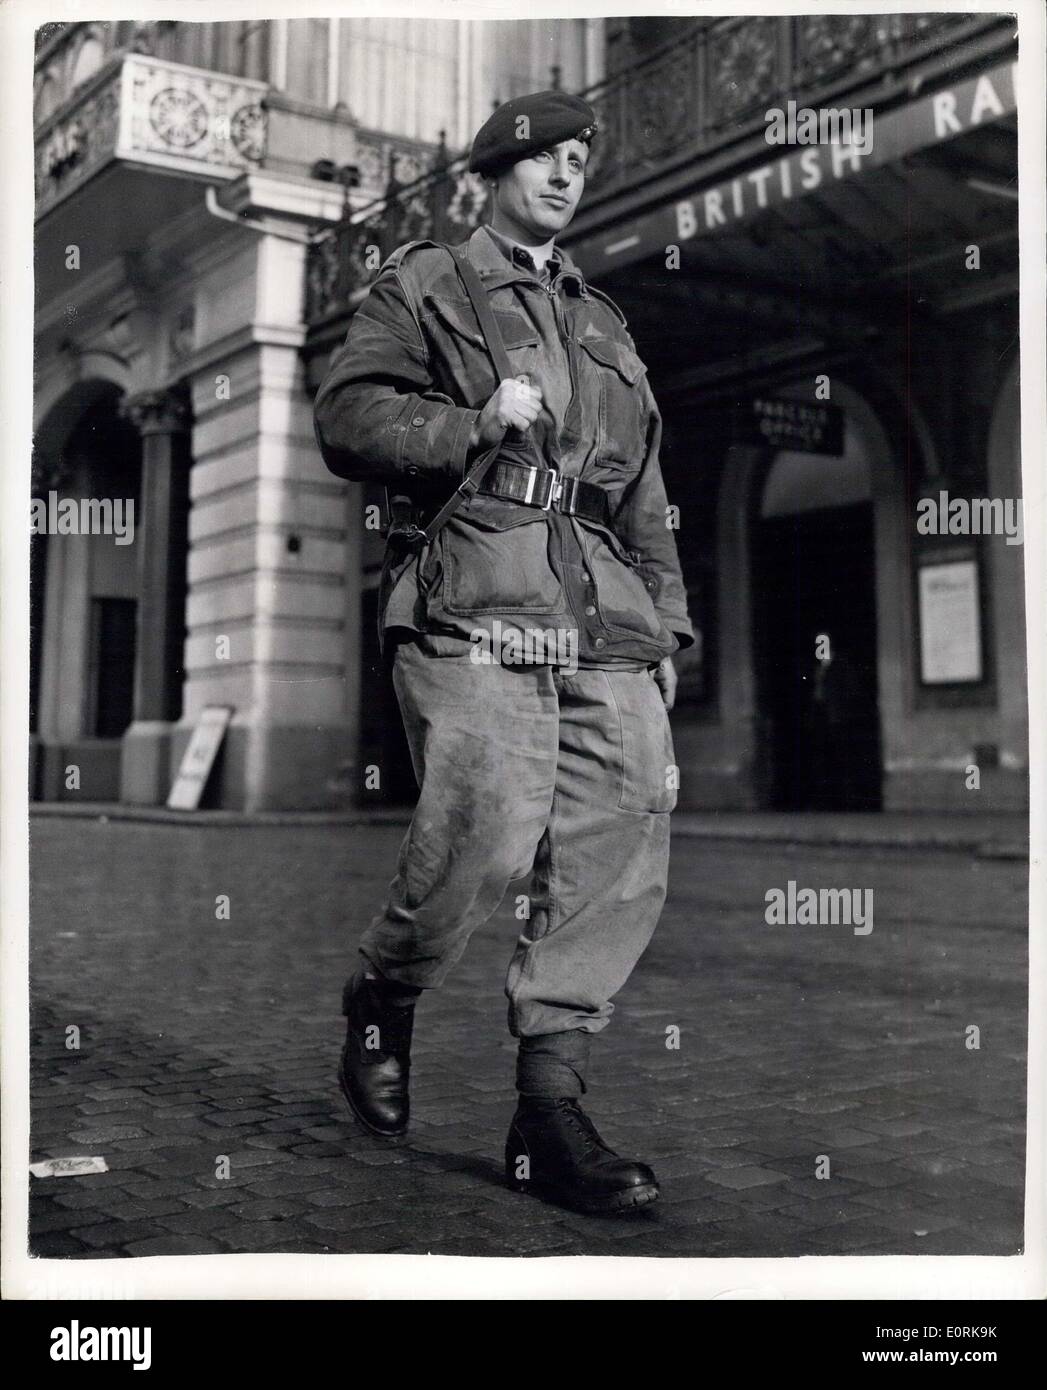 Nov. 01, 1959 - Royal Marine Commando Just Fails To Set Up New Marching Record.: Corporal Ronald Knight, 28 year old Royal Marine Commando from Romford, Essex - member of the Royal Marine Forces Volunteer Reserve, City of London Unit - arrived at Charing Cross Station this afternoon - at the end of his week-end walk. He unluckily had to give up just South of Epping - 10 miles short of Stratford because of a pulled muscle. He was trying to beat the record set up by Lieut. Wayne B. Nicholl of the U.S. Army - who walked 104.8 miles in 40 and a half hours Stock Photo